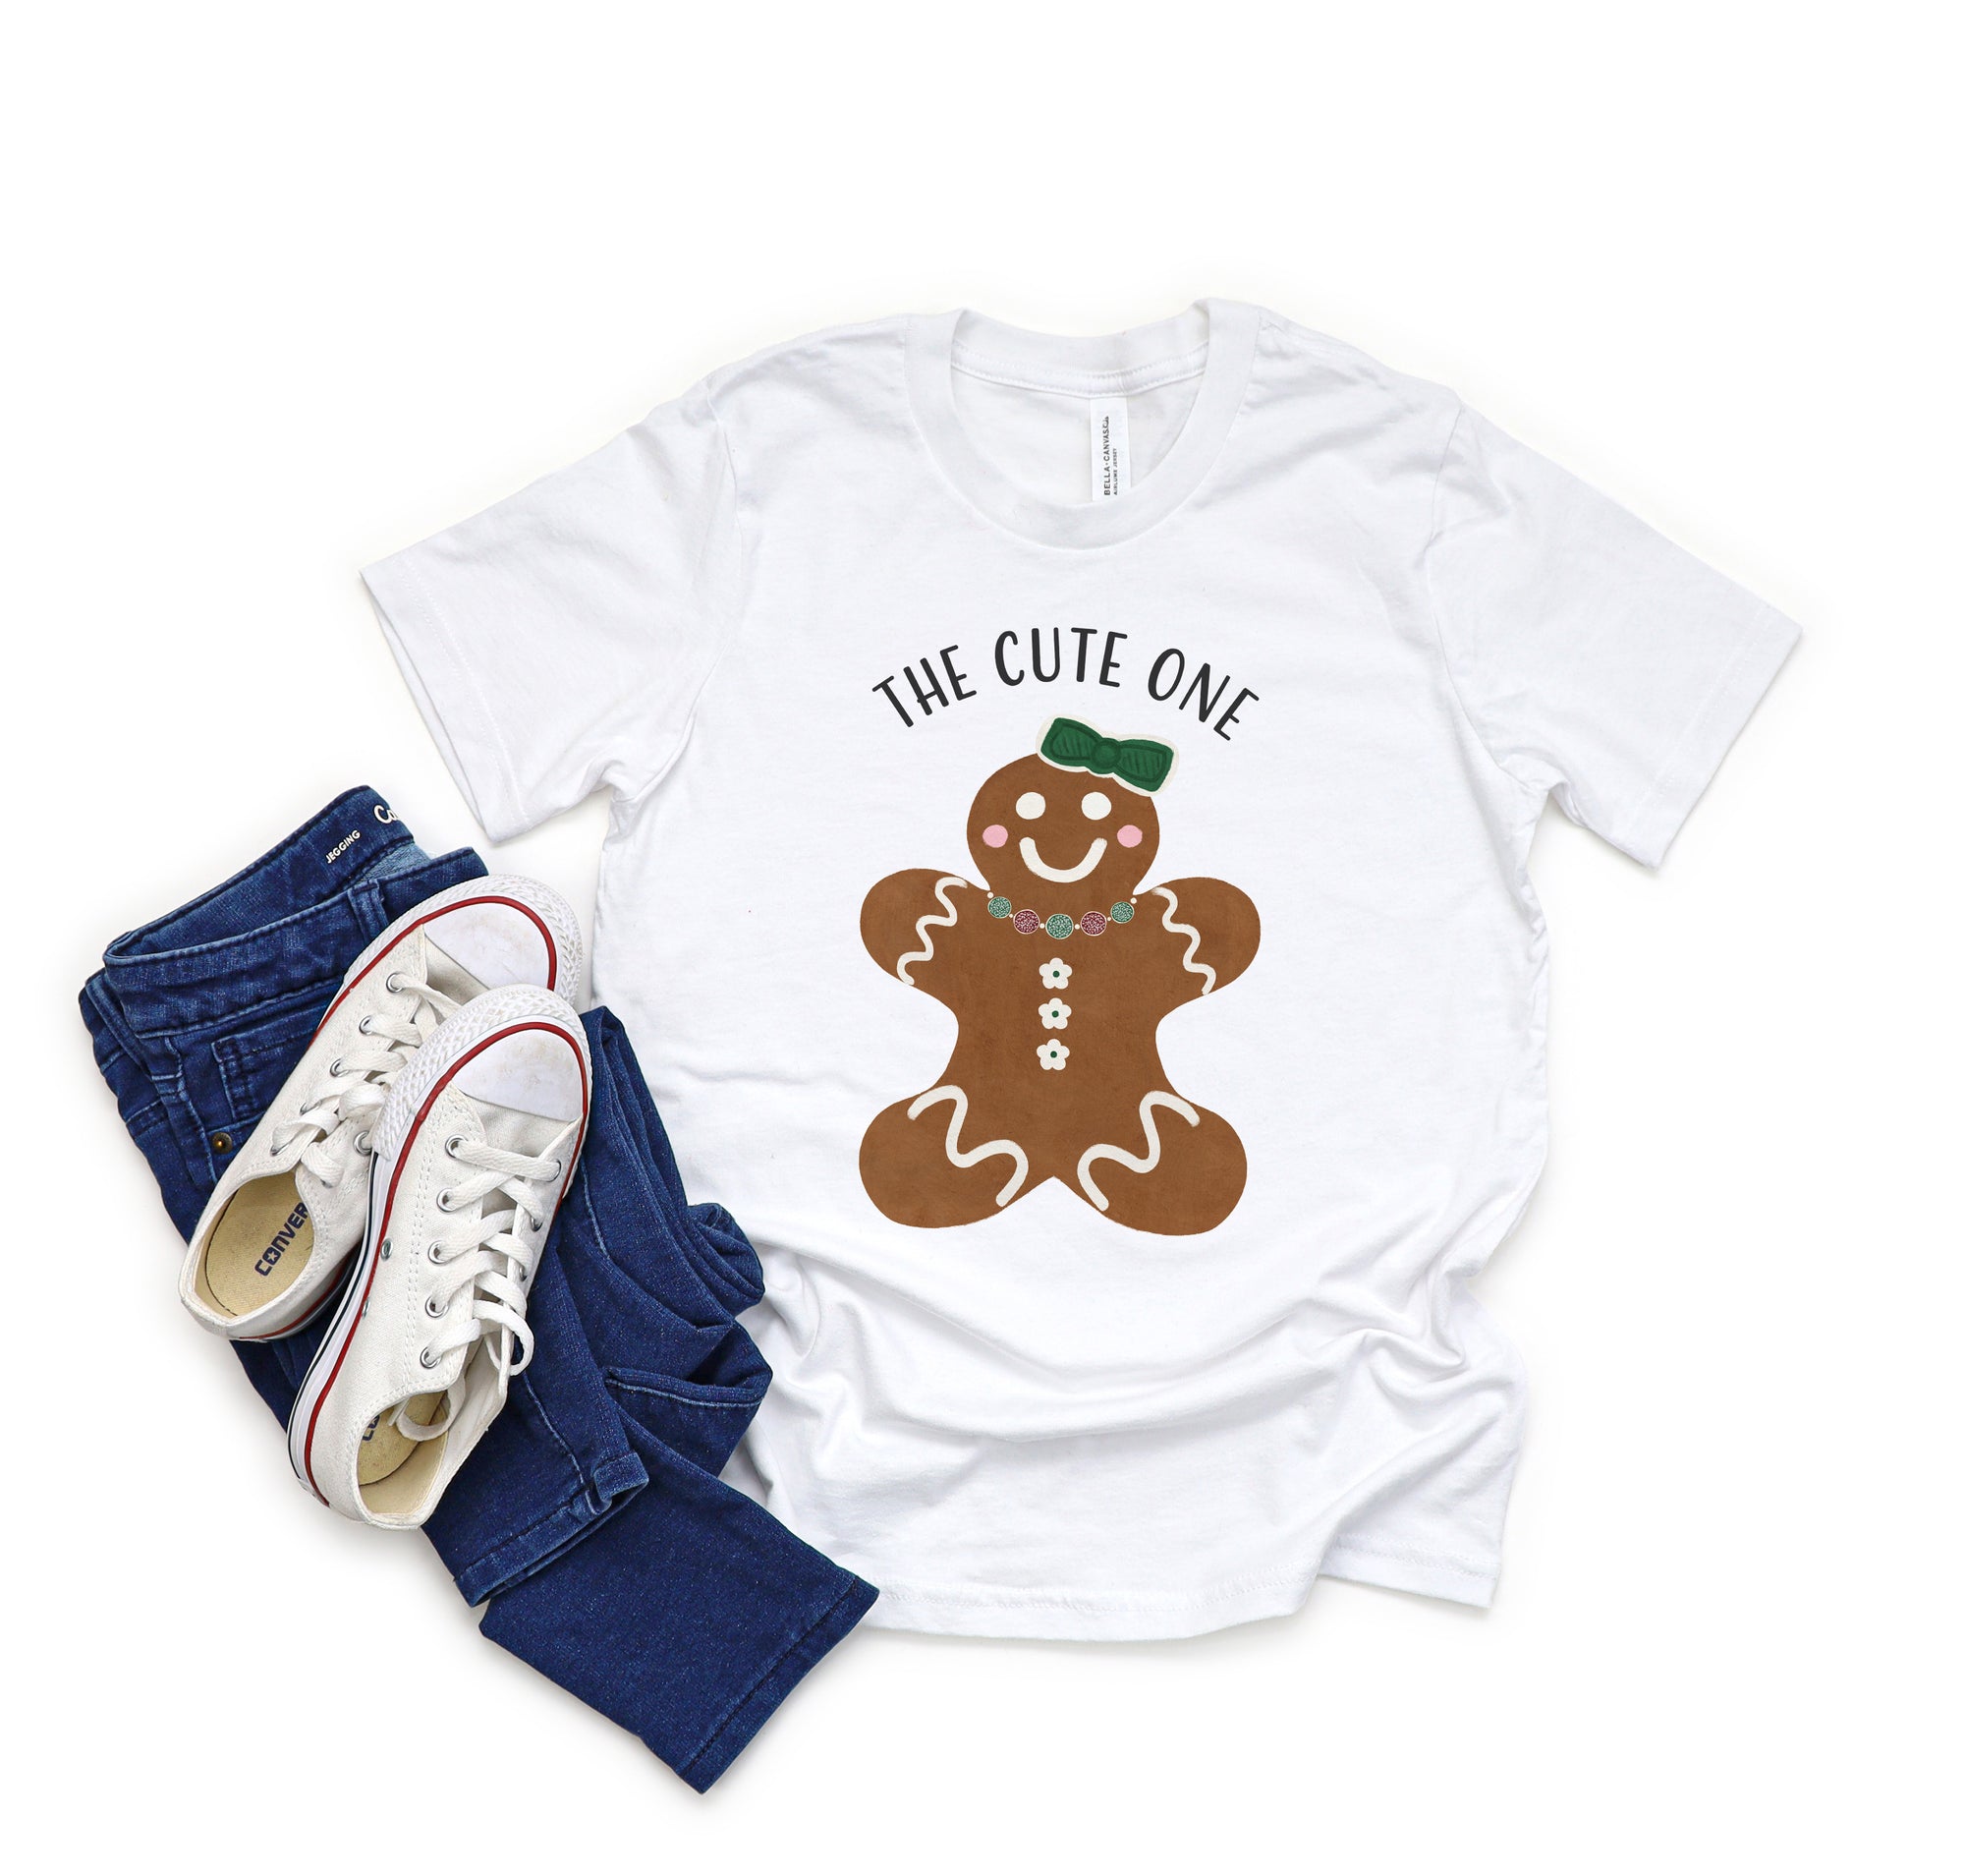 The Cute One Gingerbread Shirt in Kids, Toddler, and Infant Sizes